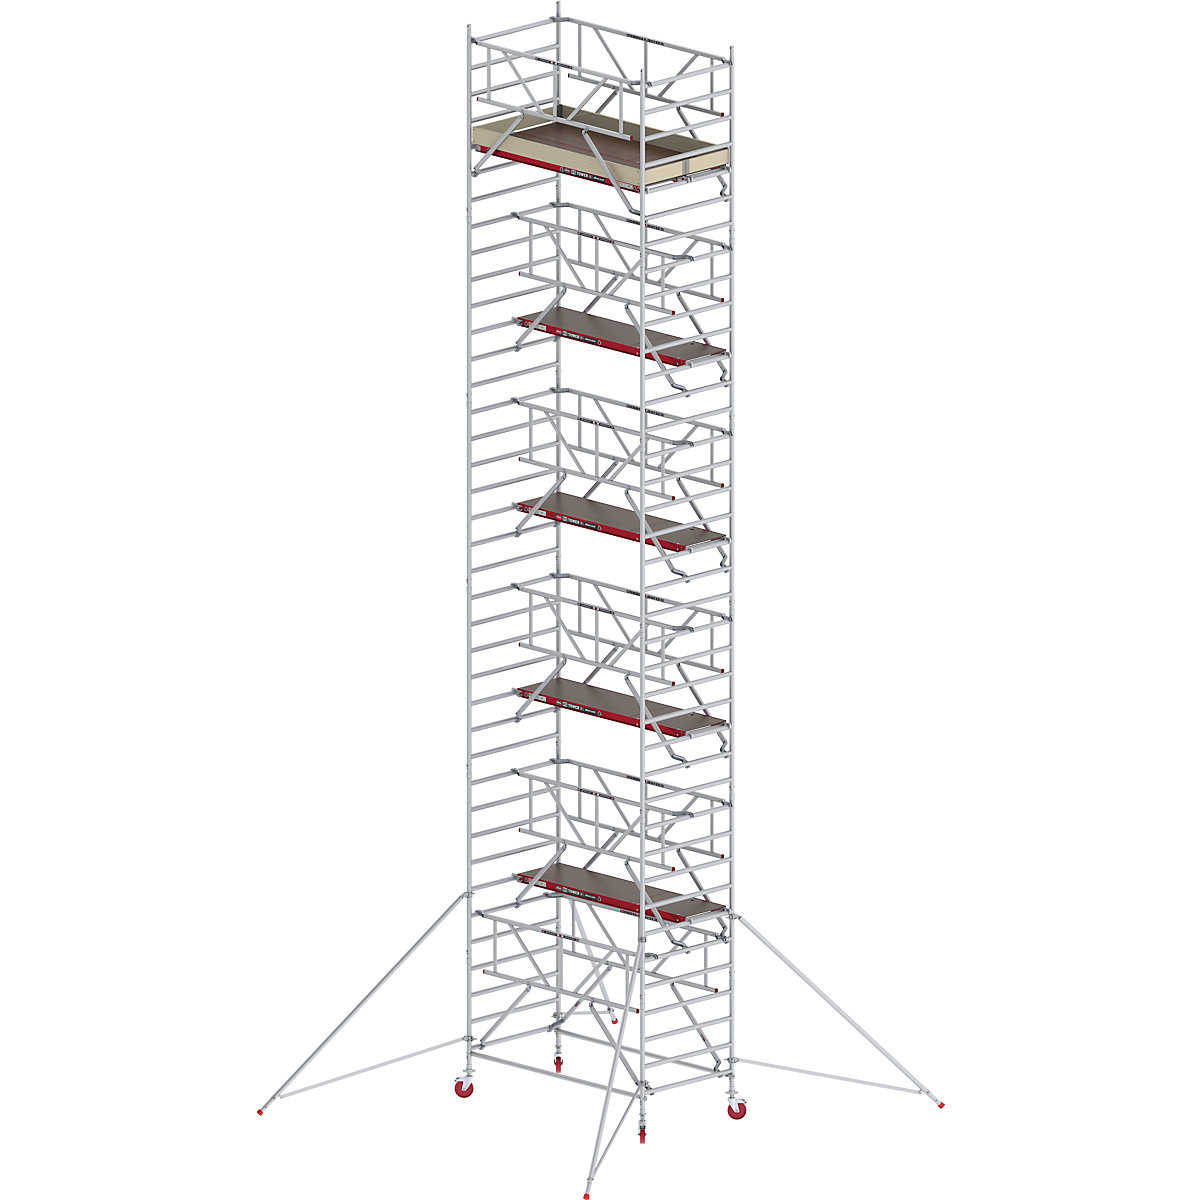 RS TOWER 42 wide mobile access tower with Safe-Quick® – Altrex, wooden platform, length 1.85 m, working height 12.2 m-2